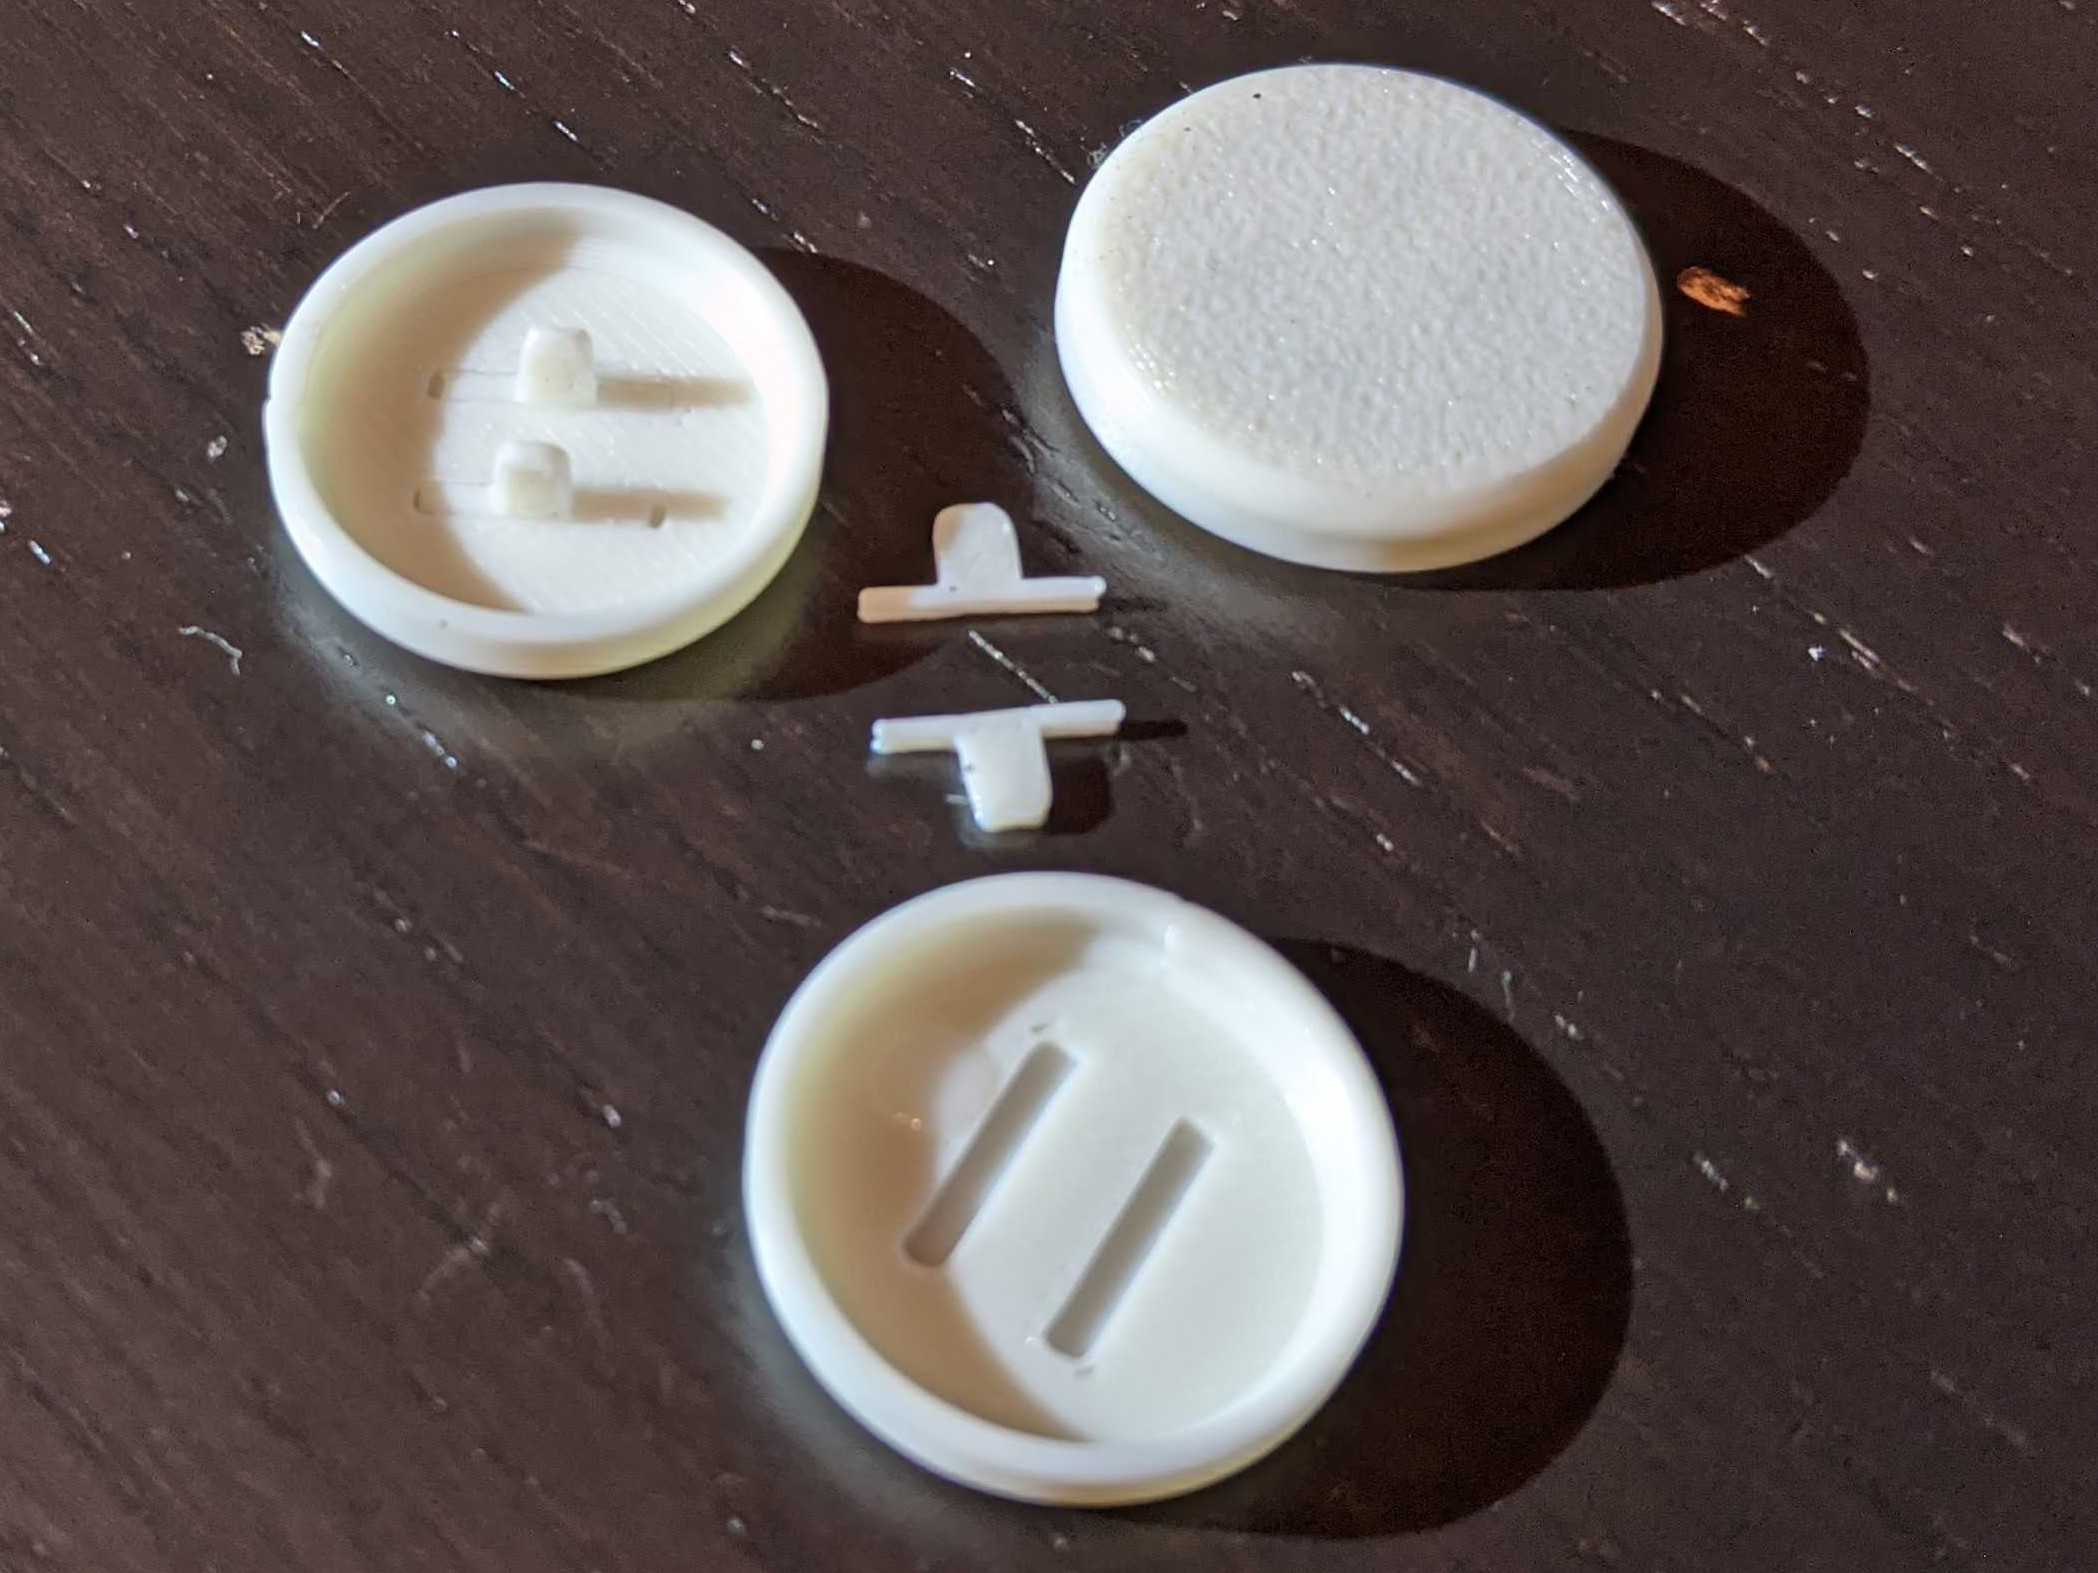 Better Printed Arcade Button Kailh Choc V1 Low Profile (legs don't break)